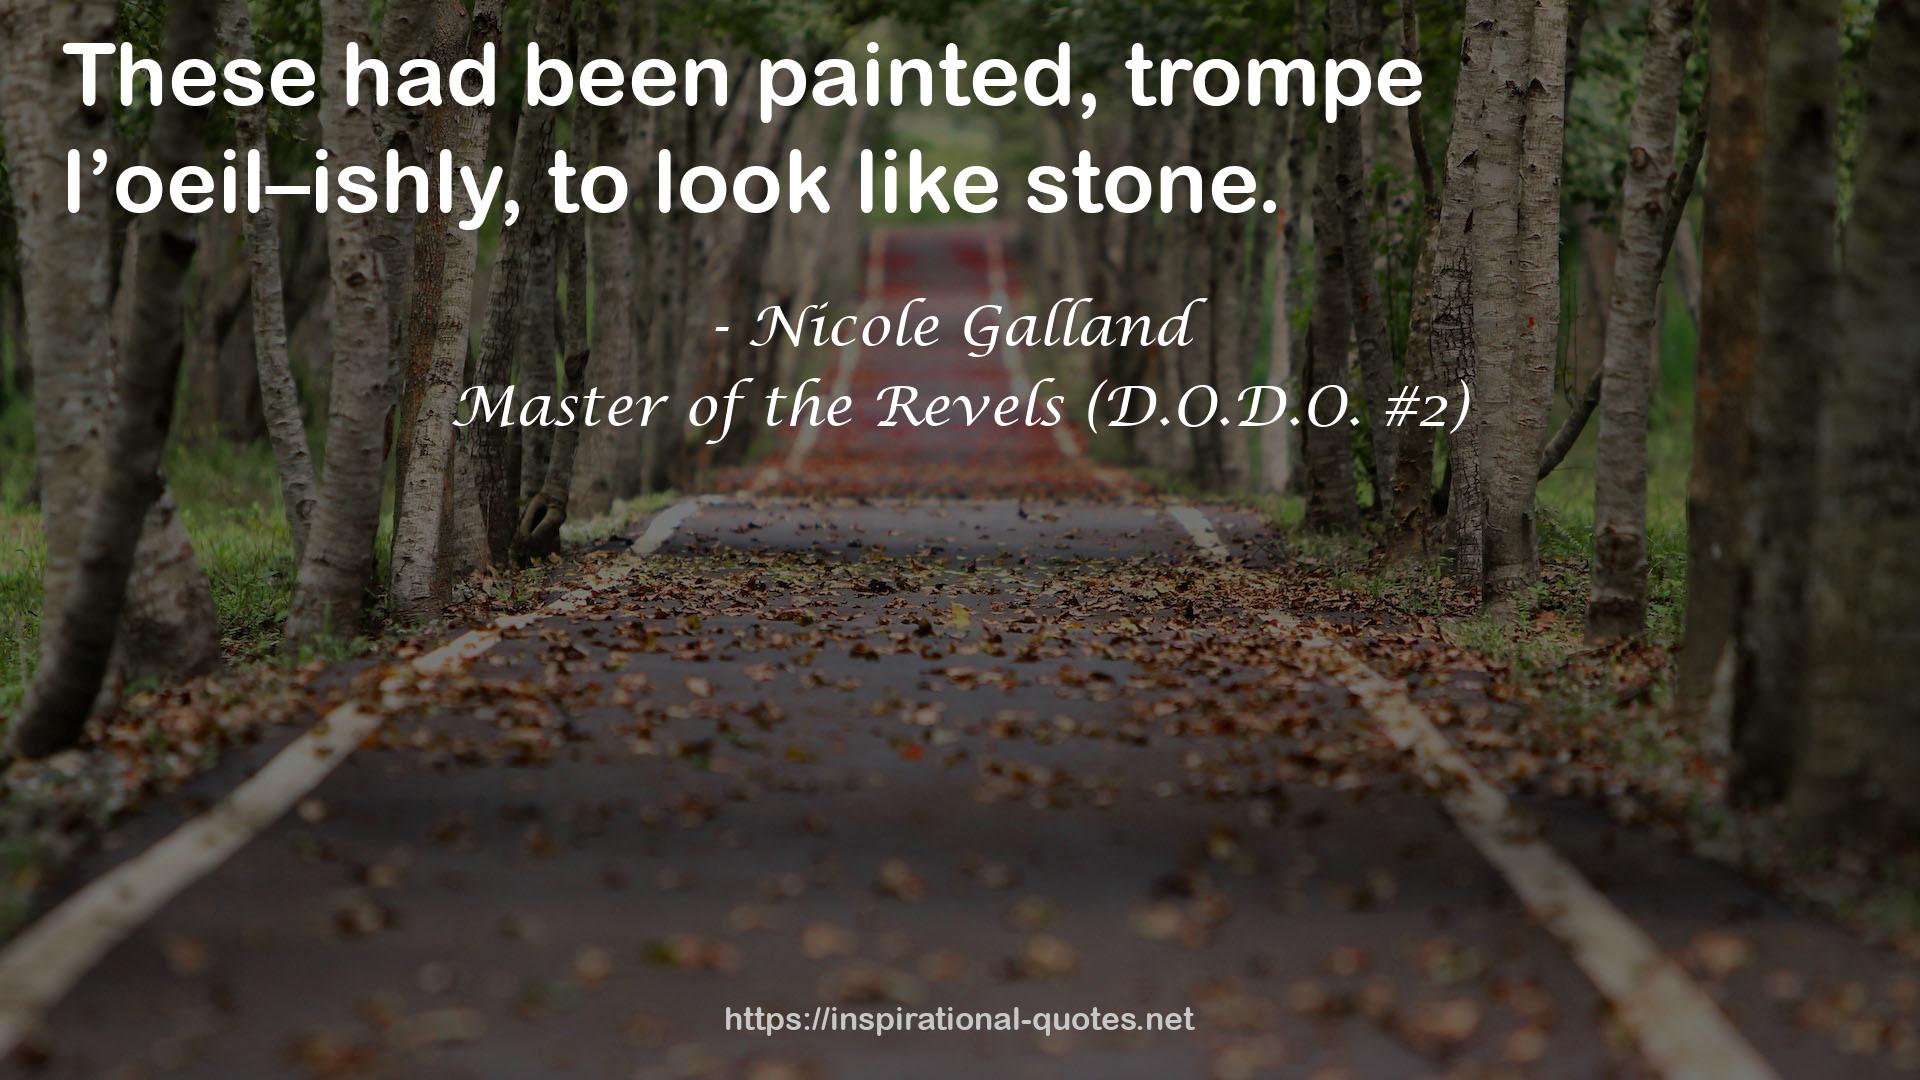 Master of the Revels (D.O.D.O. #2) QUOTES